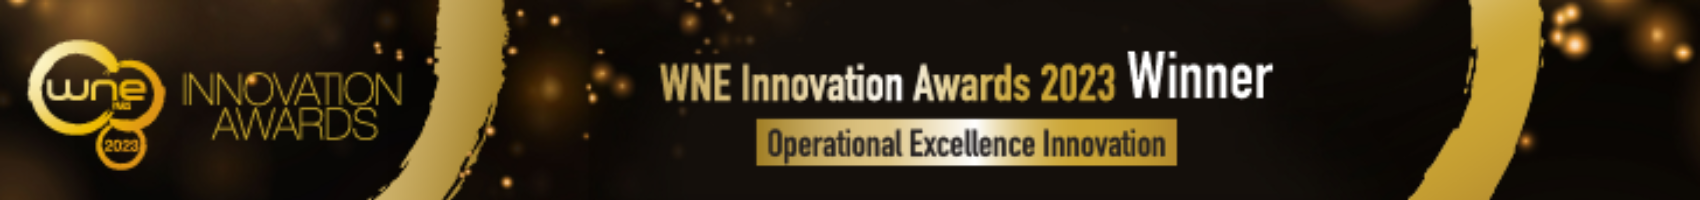 WNE23_Banners-Innovation-Awards-Winner_Operational-Excellence-Innovation